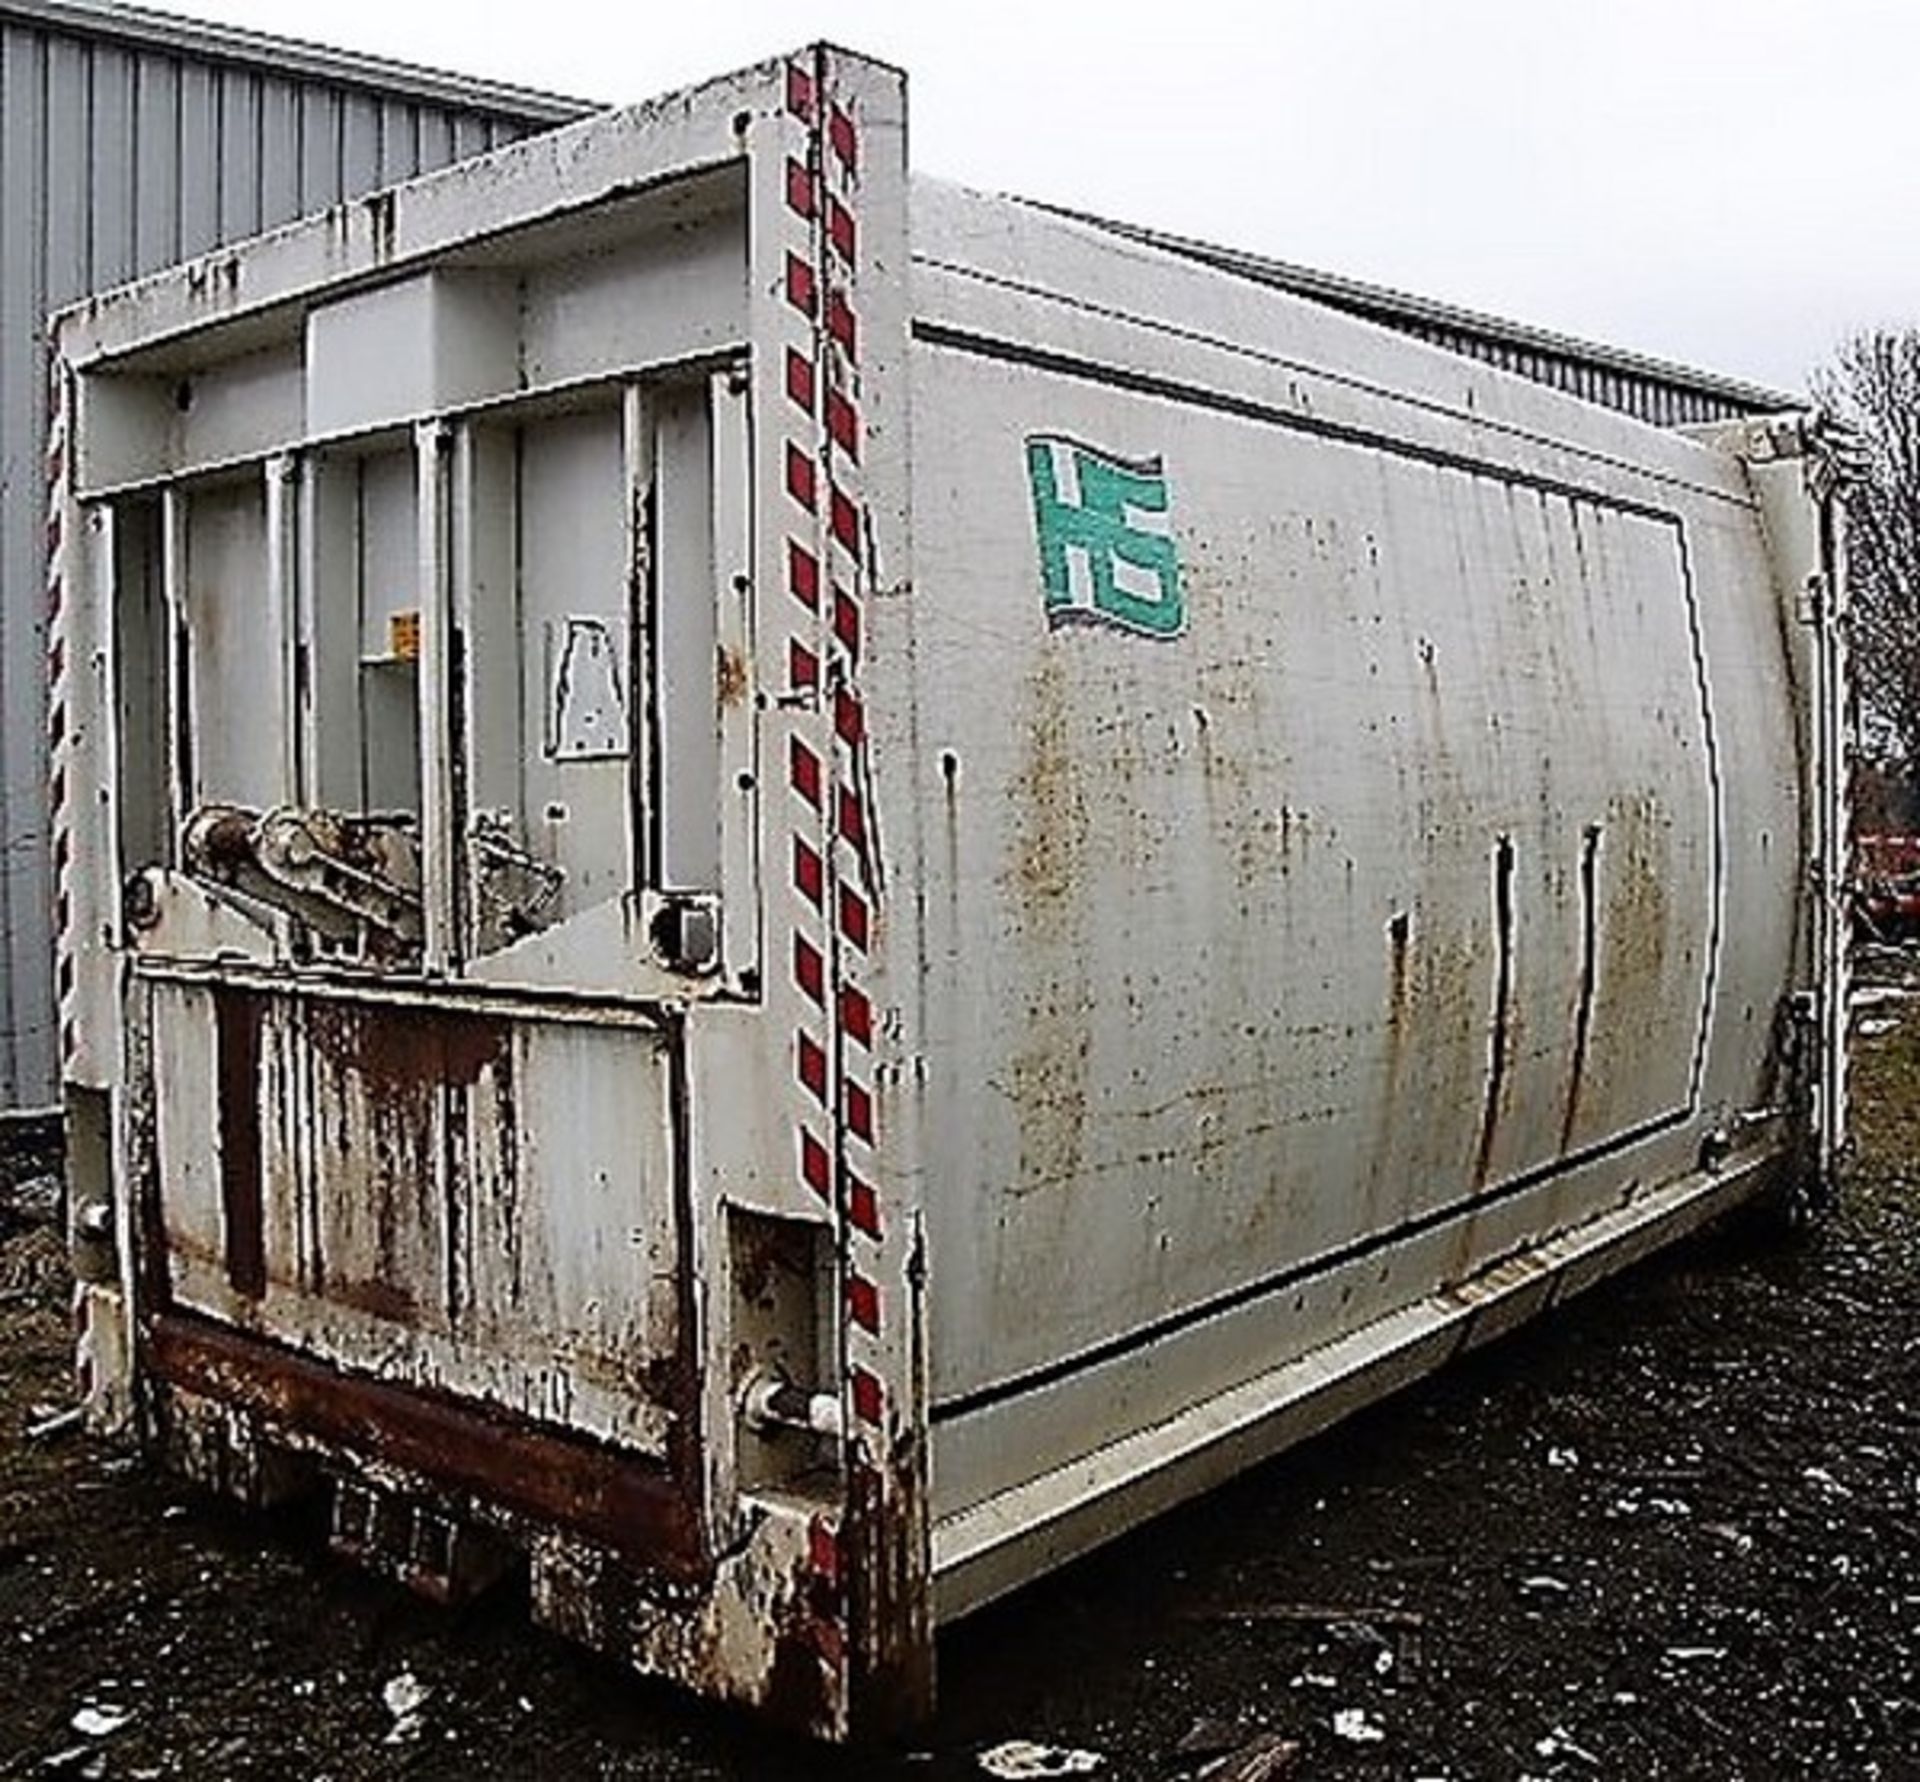 ENCLOSED COMPACTION SKIP. SOLD FROM ERROL AUCTION SITE. VIEWING AND UPLIFT FROM LOWER POLMAISE FK7 7 - Bild 2 aus 4